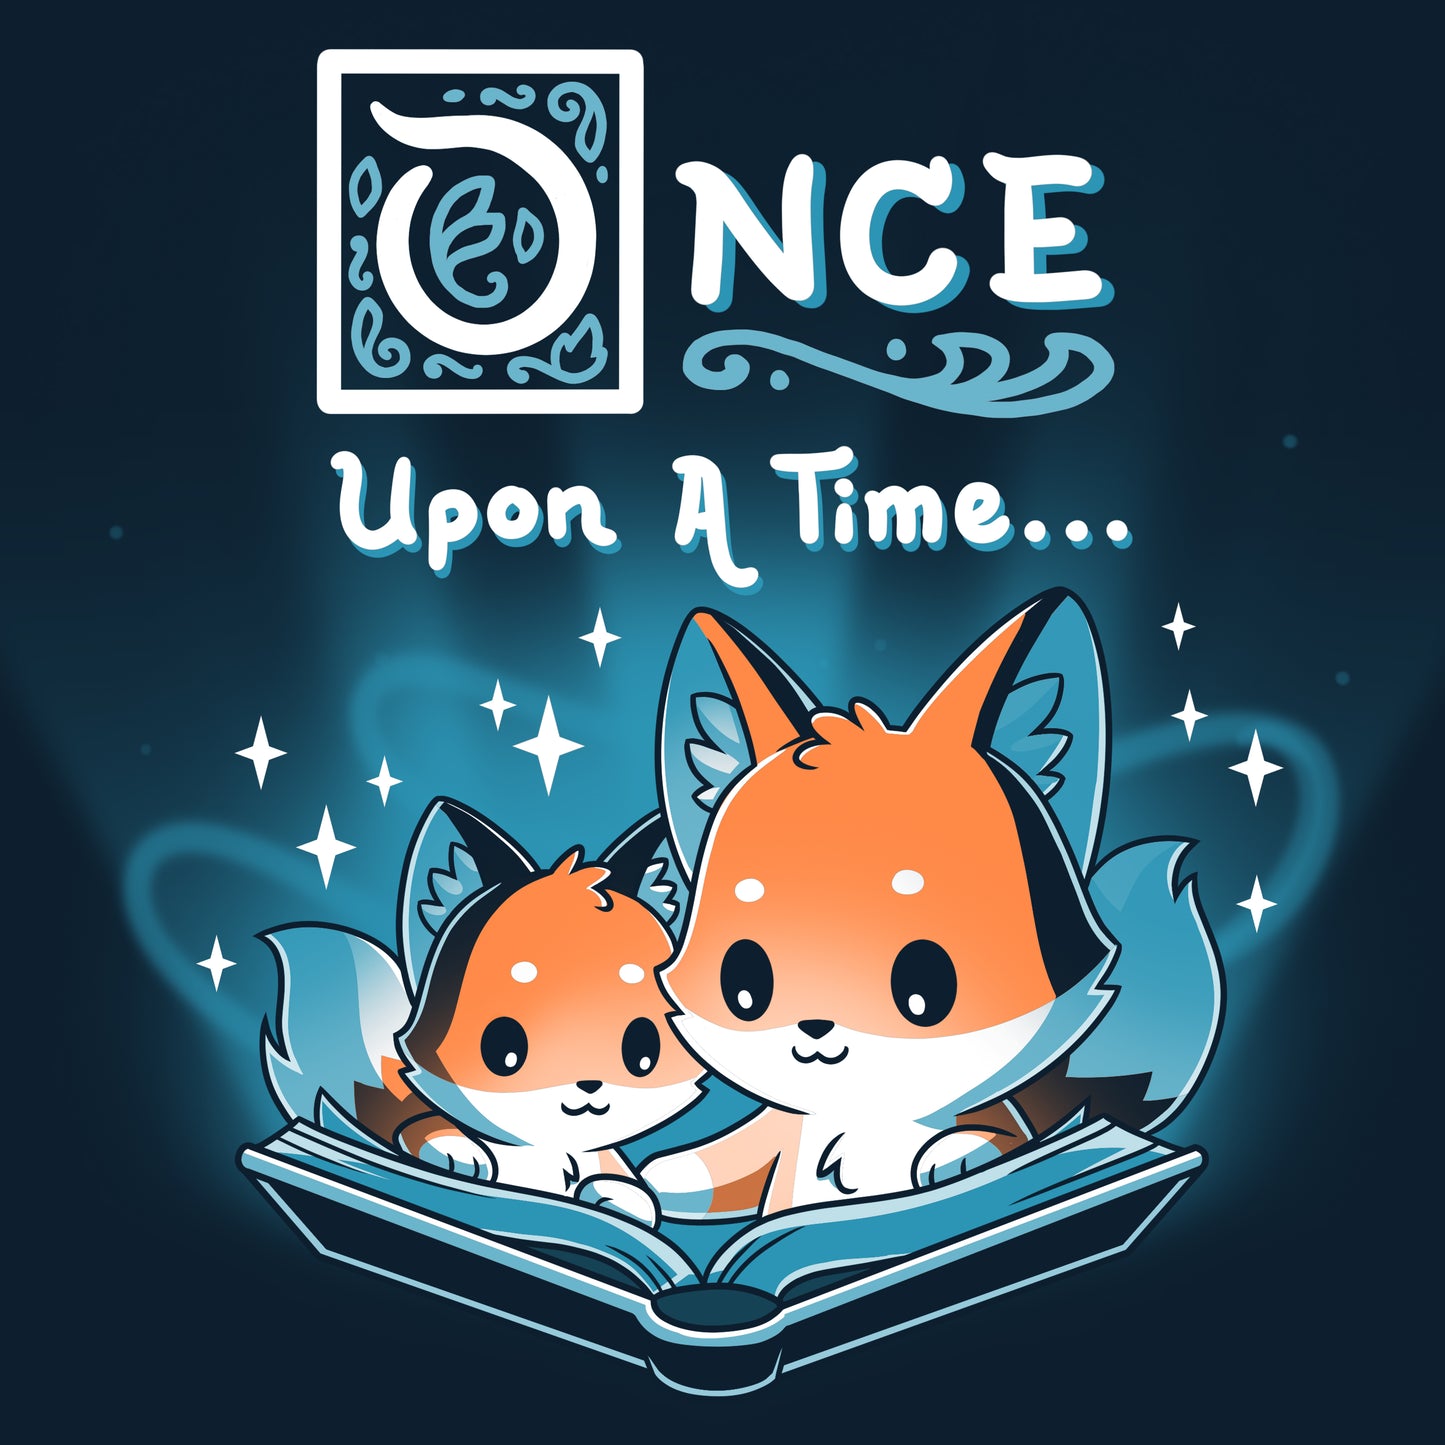 Once upon a time, TeeTurtle's Once Upon a Time (Foxes) fairy tales.